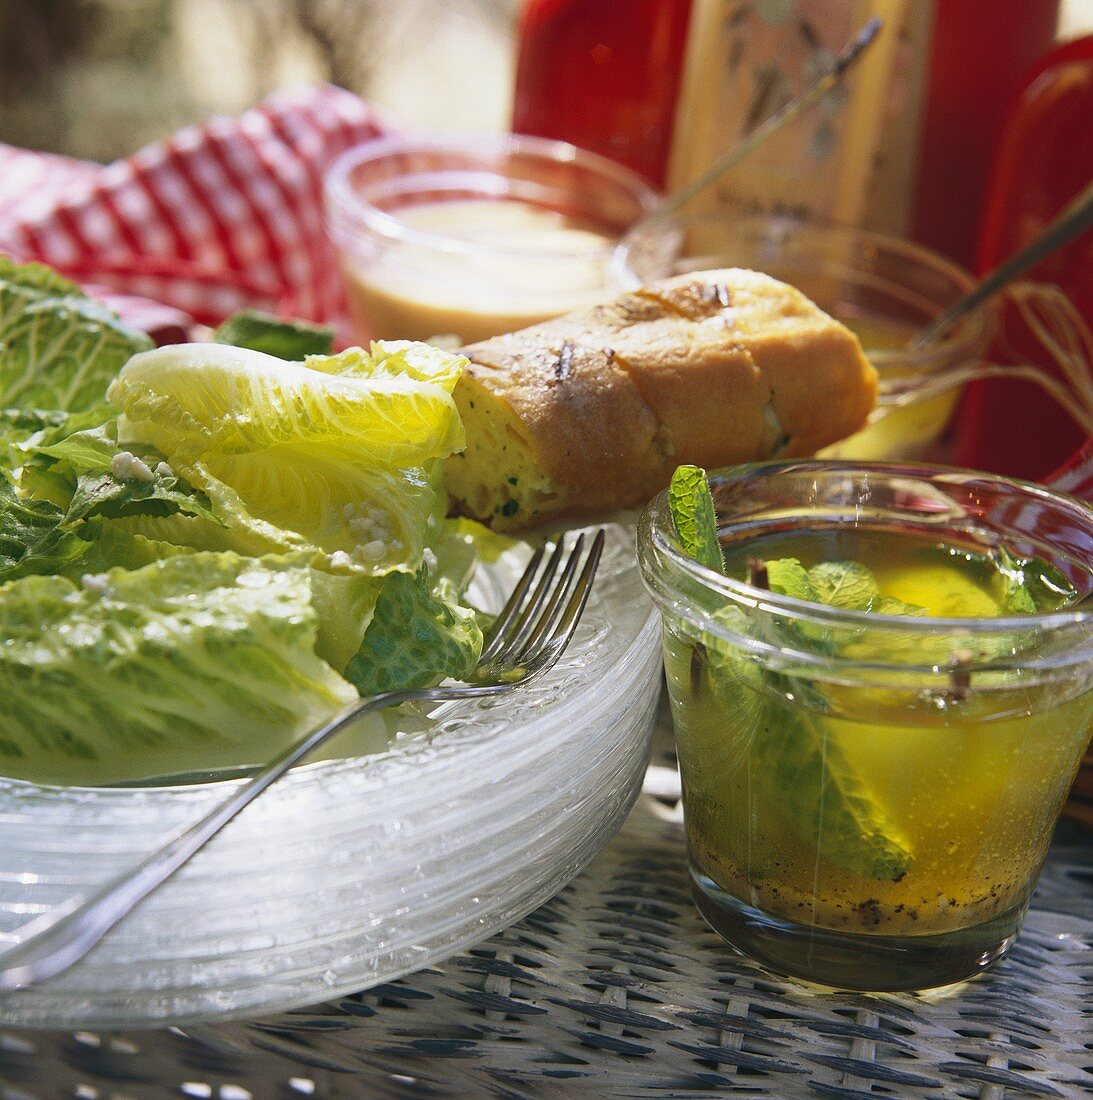 Romaine lettuce with various marinades & baguette